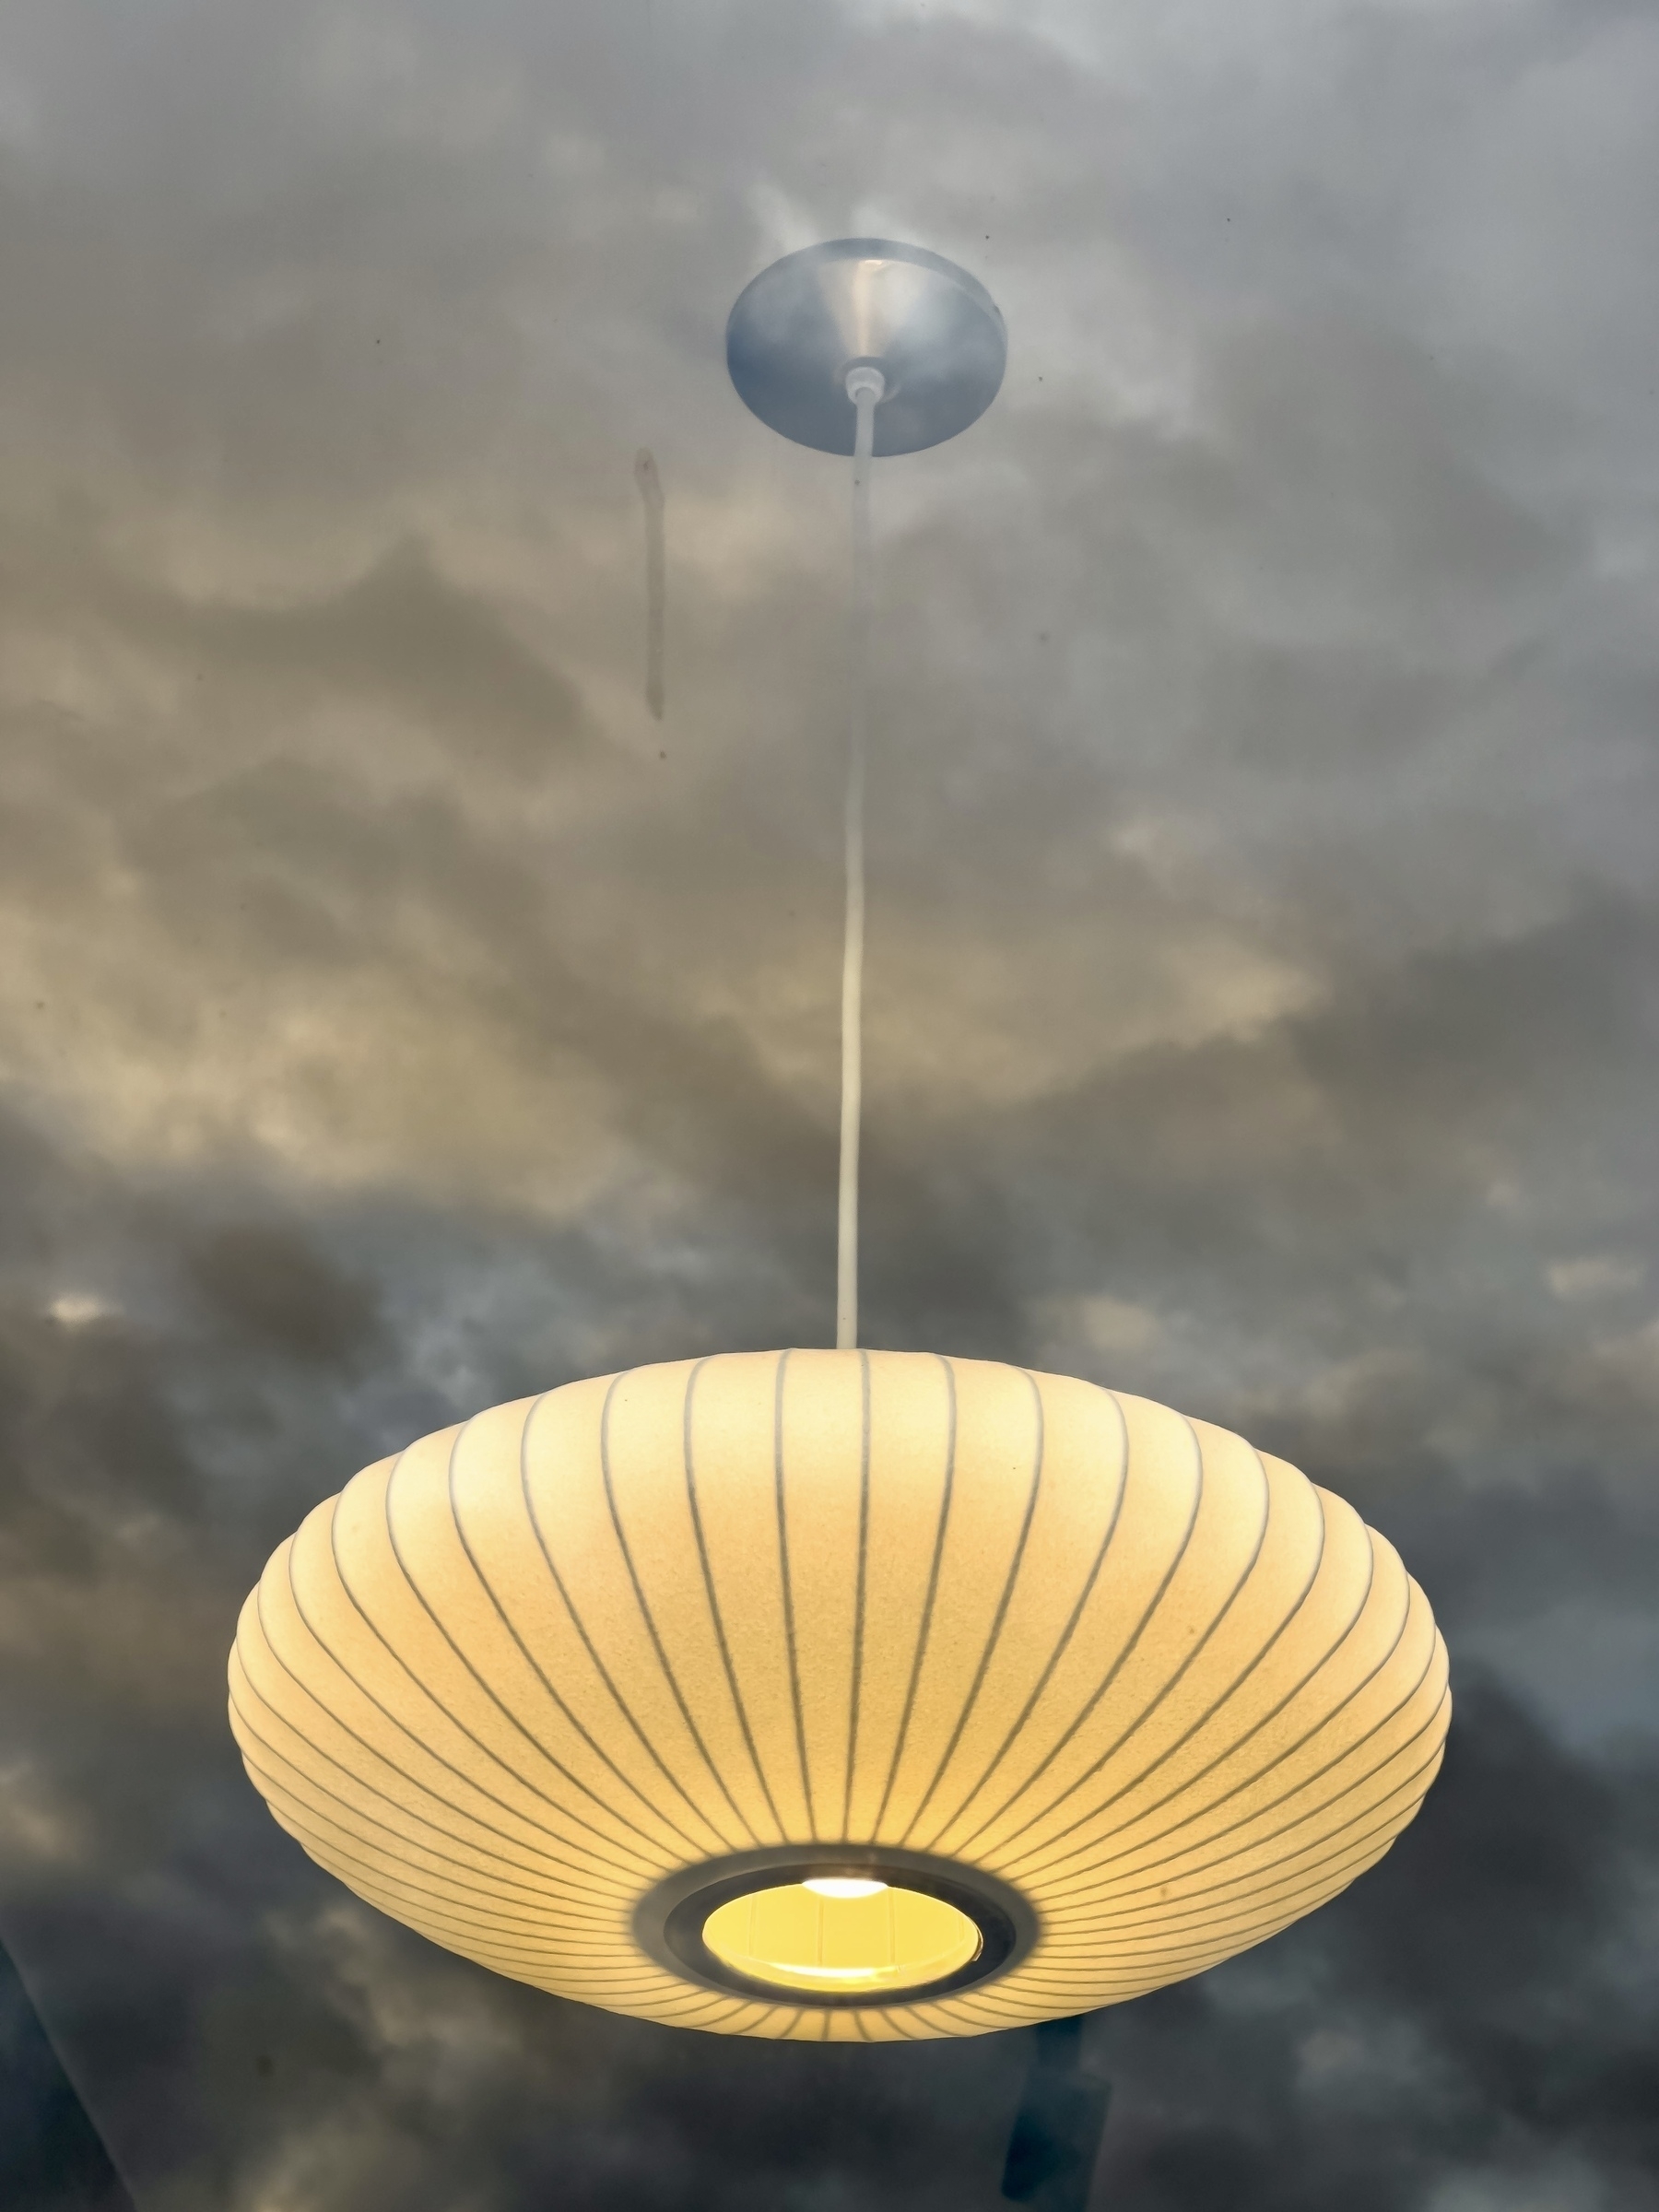 lamp hanging from sky effect, lamp in shop window overlaid with clouds in the sky reflection